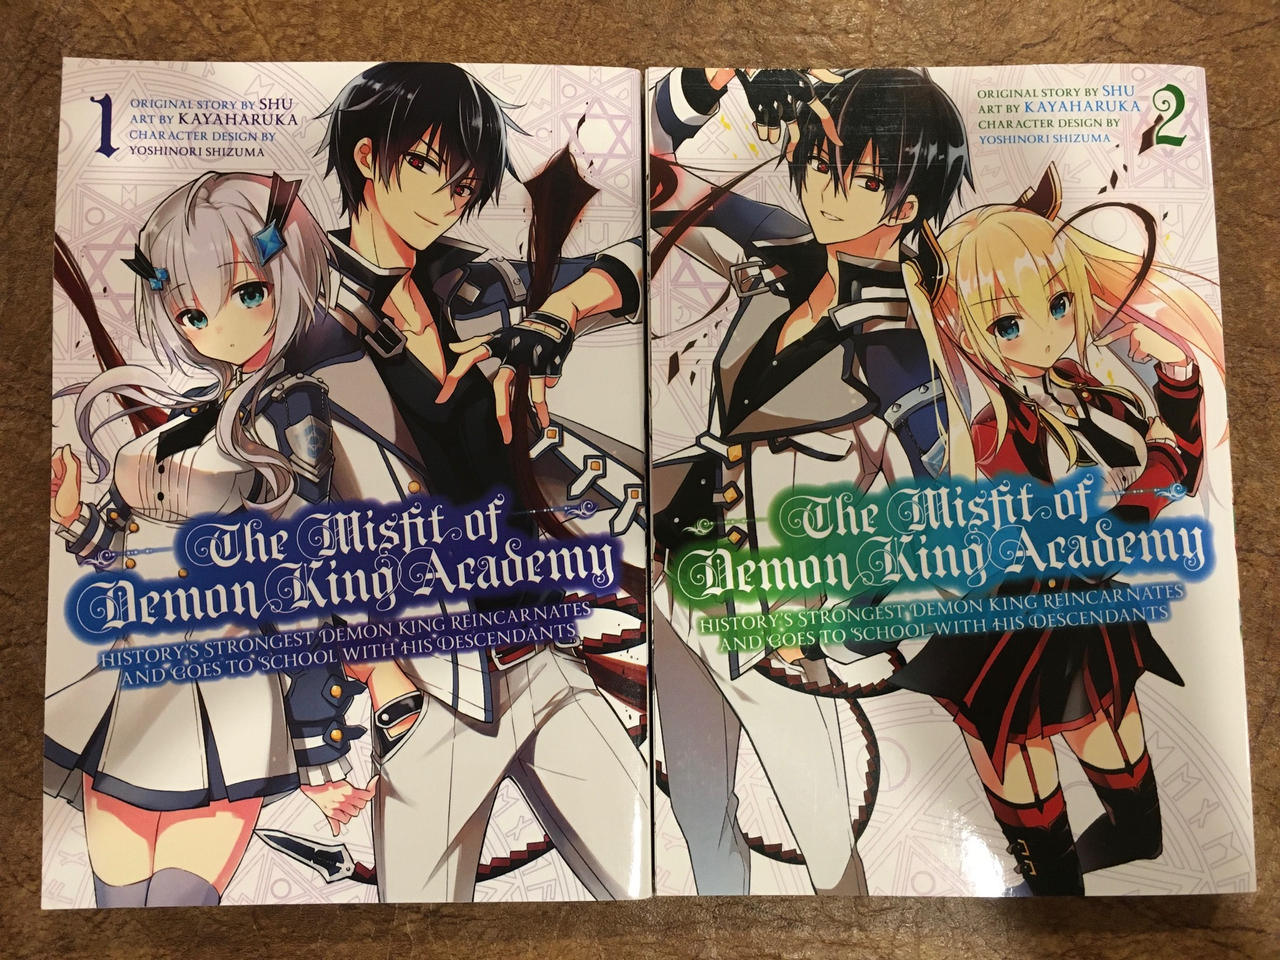 Anime News And Facts on X: The Misfit of Demon King Academy